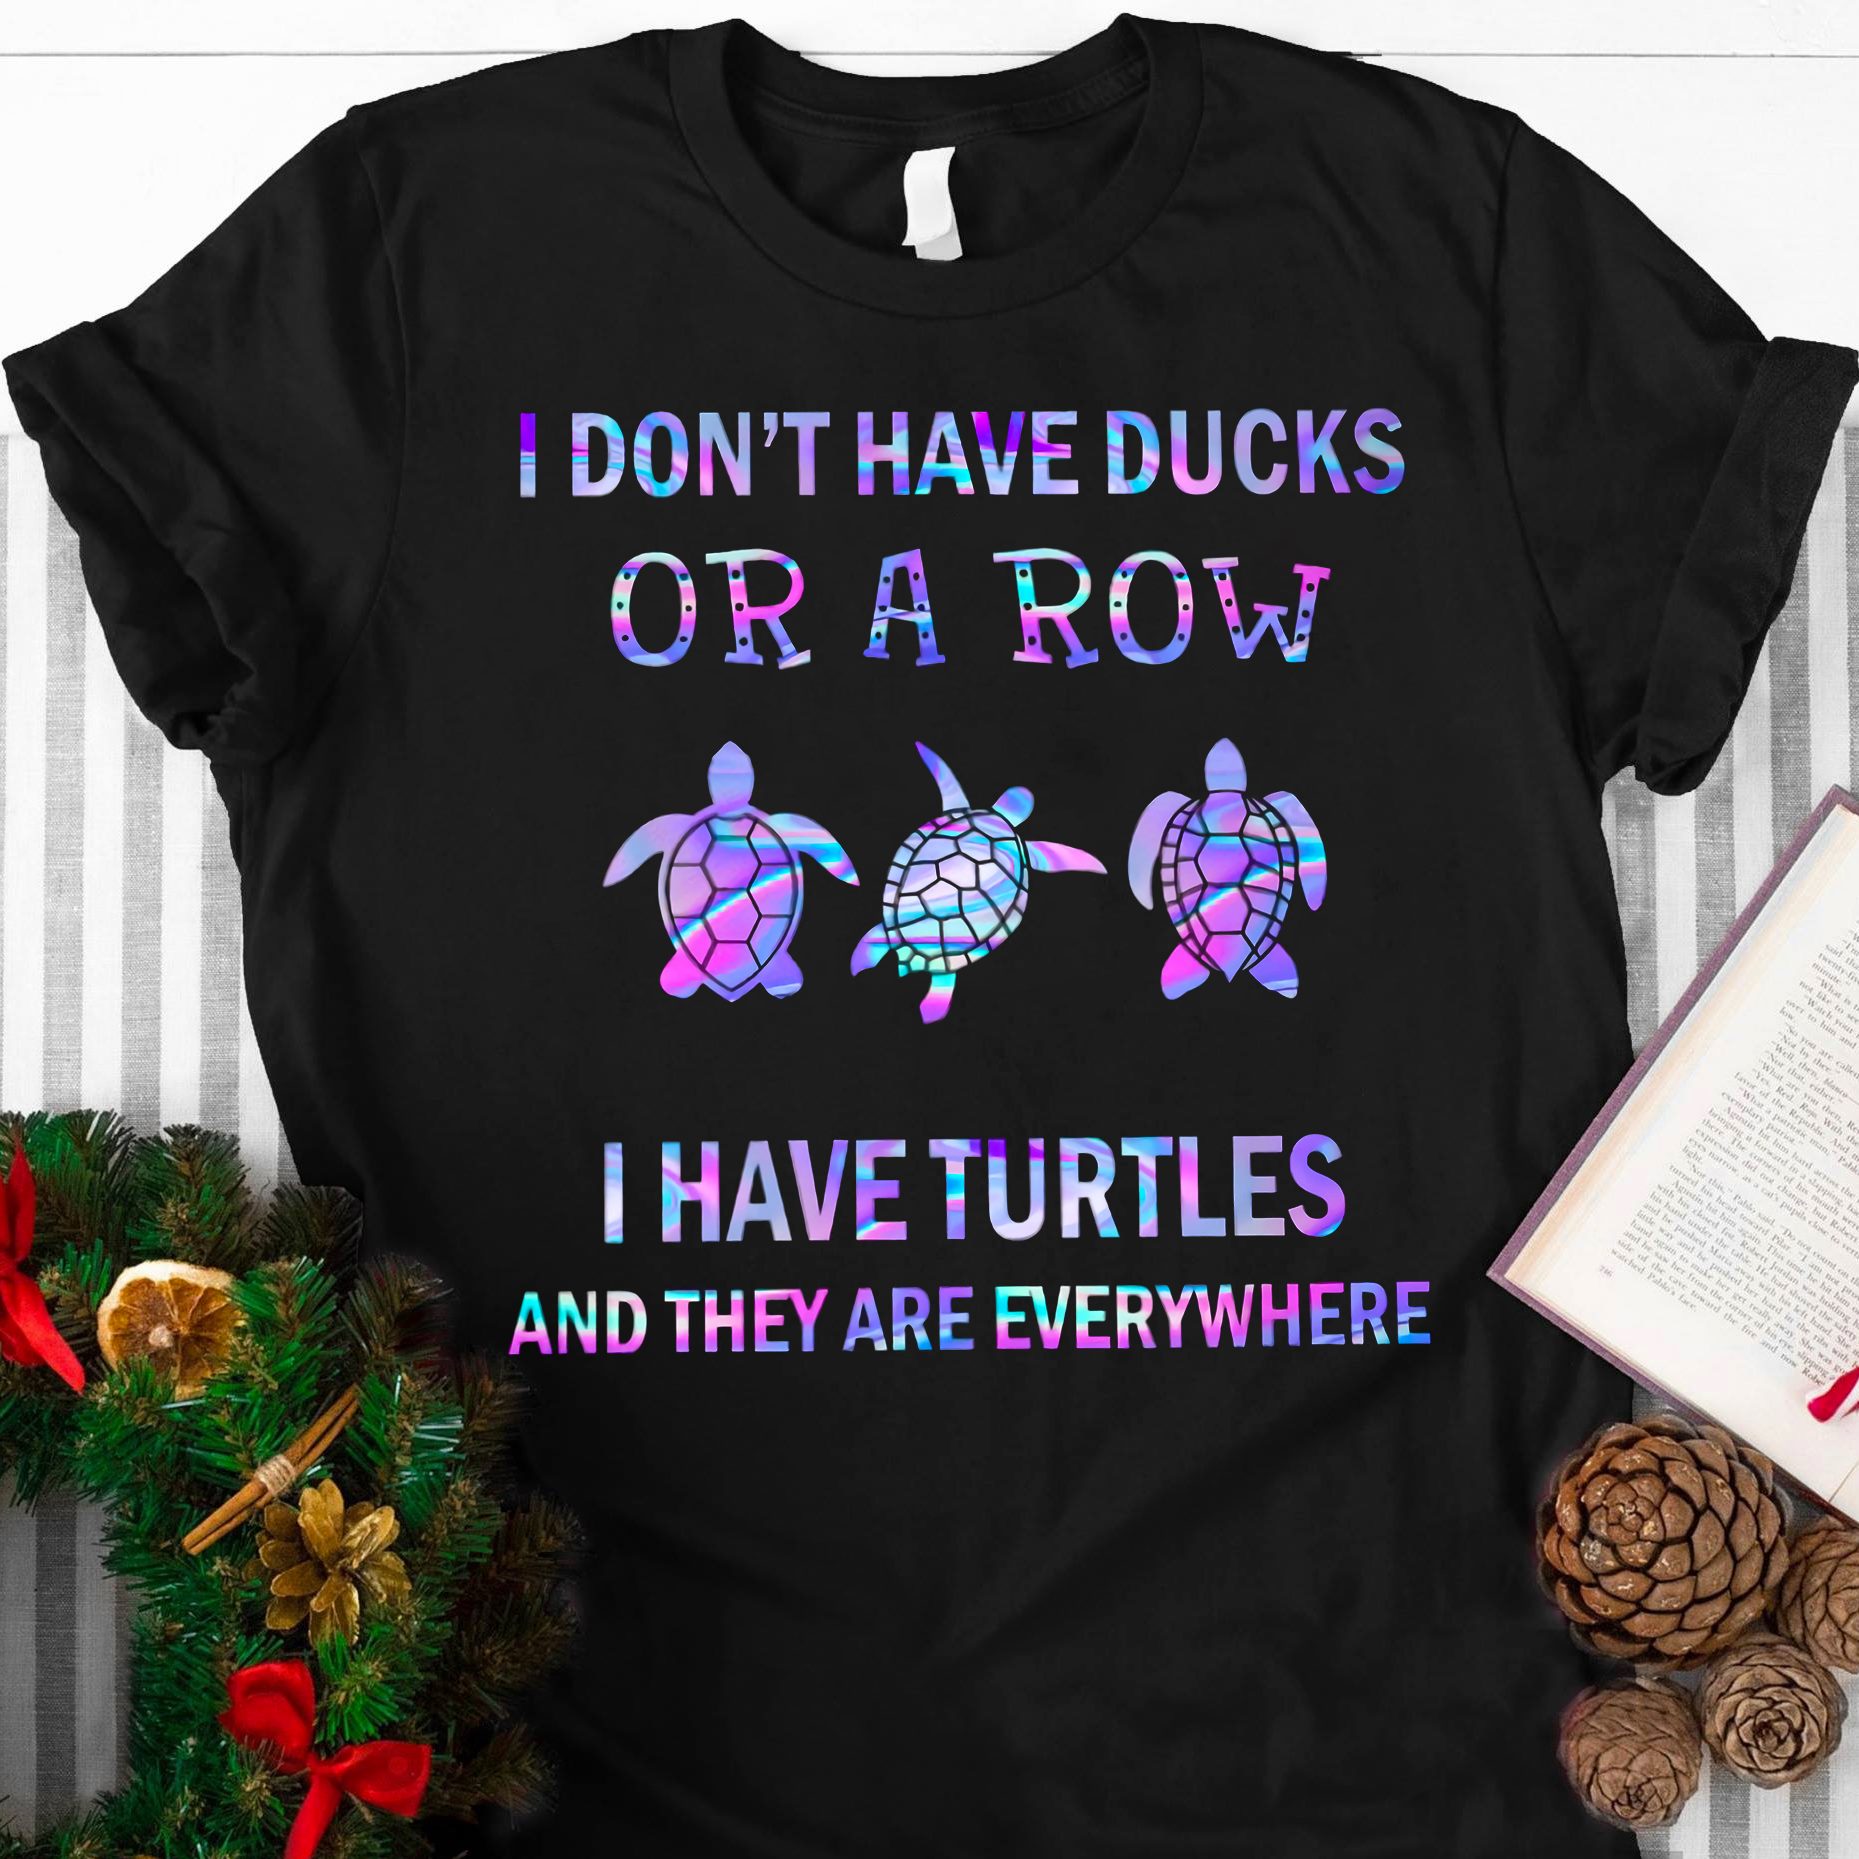 I don't have ducks or a row I have turtles and they are everywhere